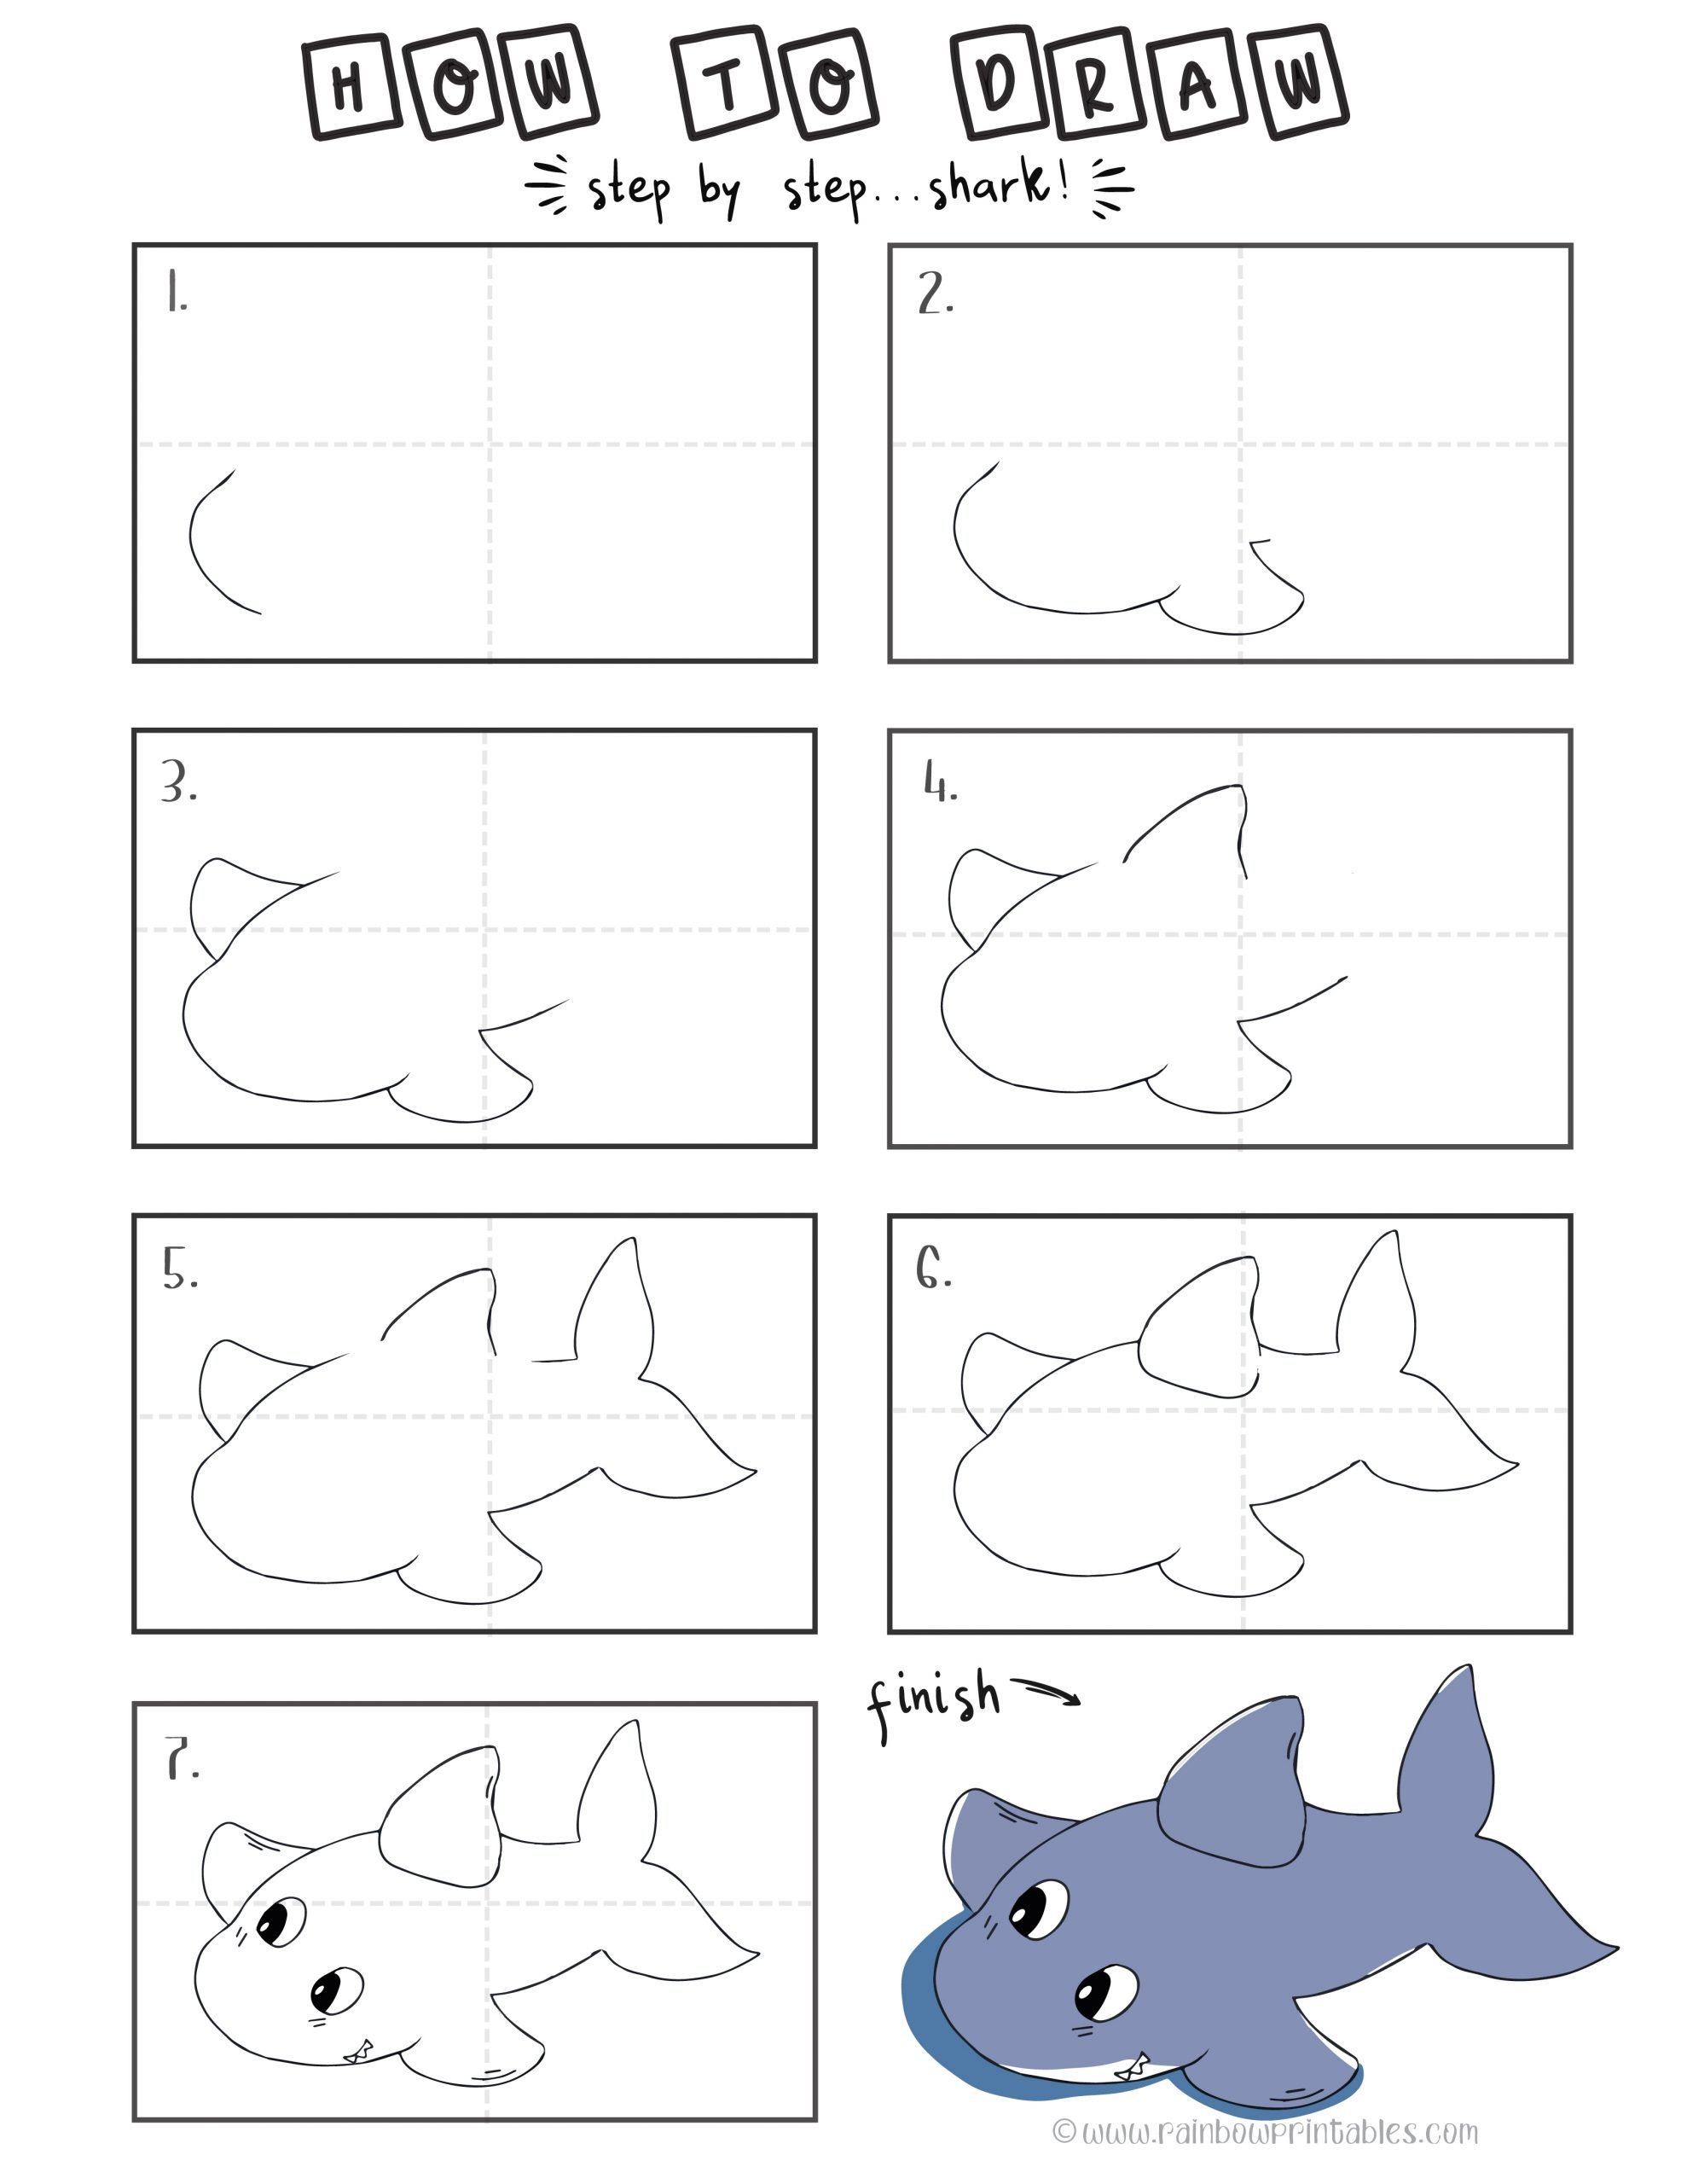 How To Draw a Shark for Kids (Step by Step Tutorial), Free Art Drawing Lesson for Children on How to Doodle a Shark